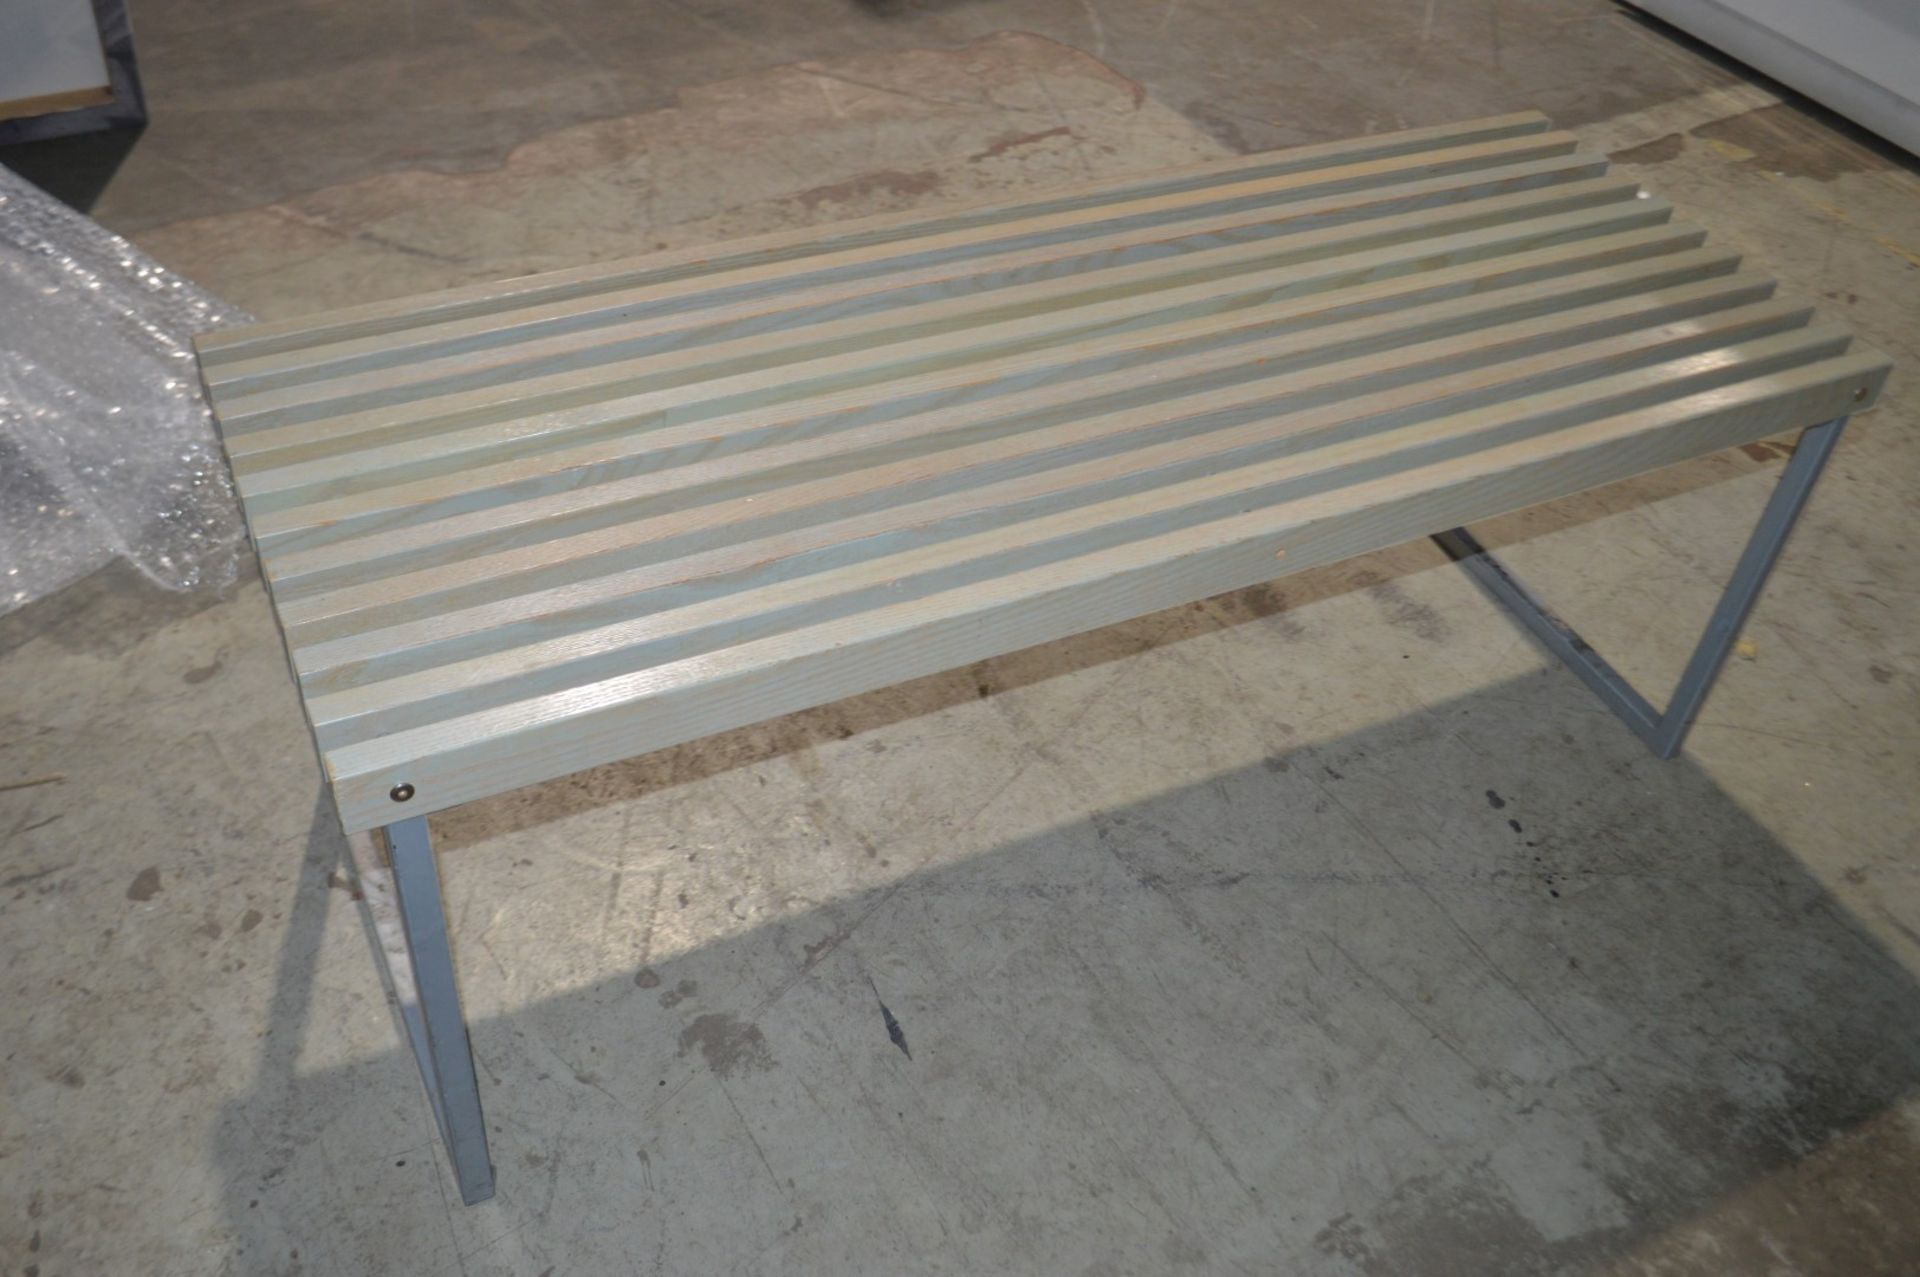 1 x Department Store Bench With Wooden Beams In A Limed Oak Finish - Dimensions: W135 x D50 x - Image 3 of 4